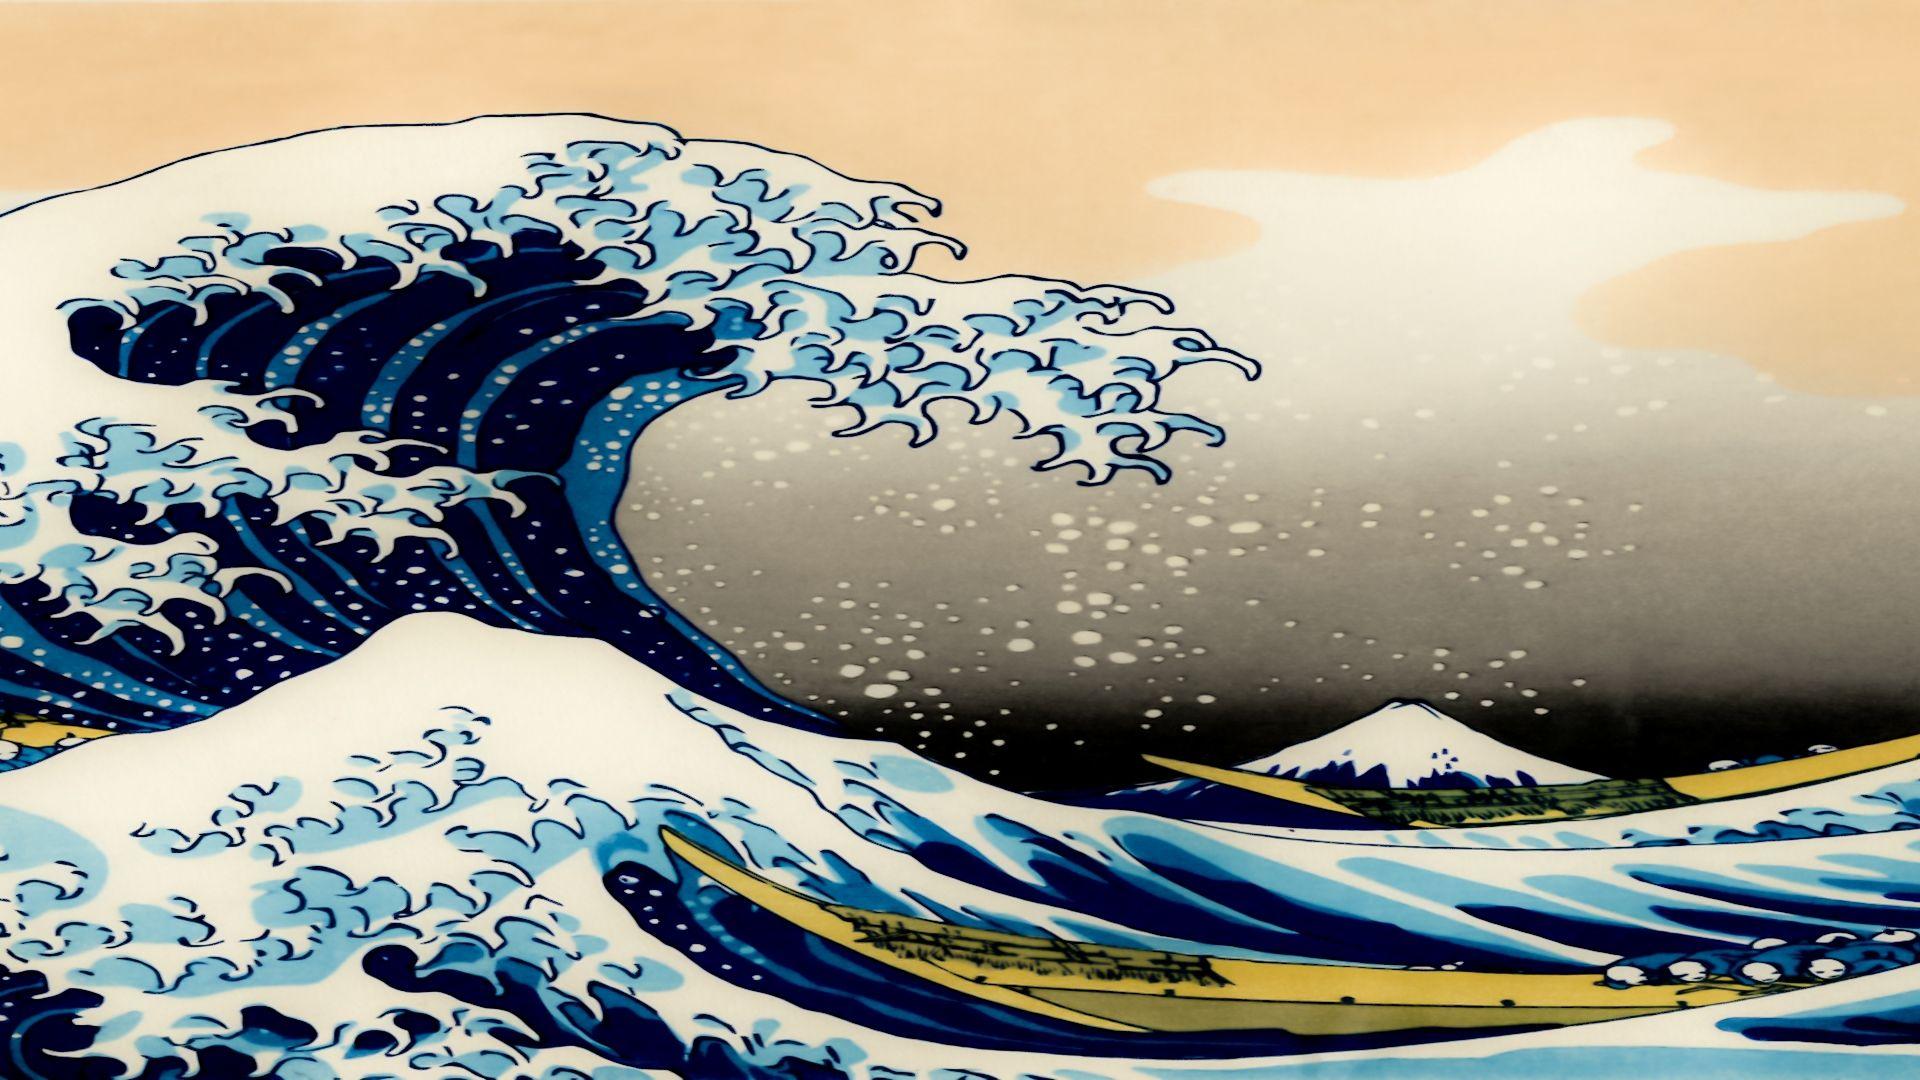 The Great Wave of Kanagawa by Hokusai painting Isle of Dogs waves The Great  Wave off Kanagawa 2K wallpaper hdwall  Hokusai paintings Isle of  dogs Great wave